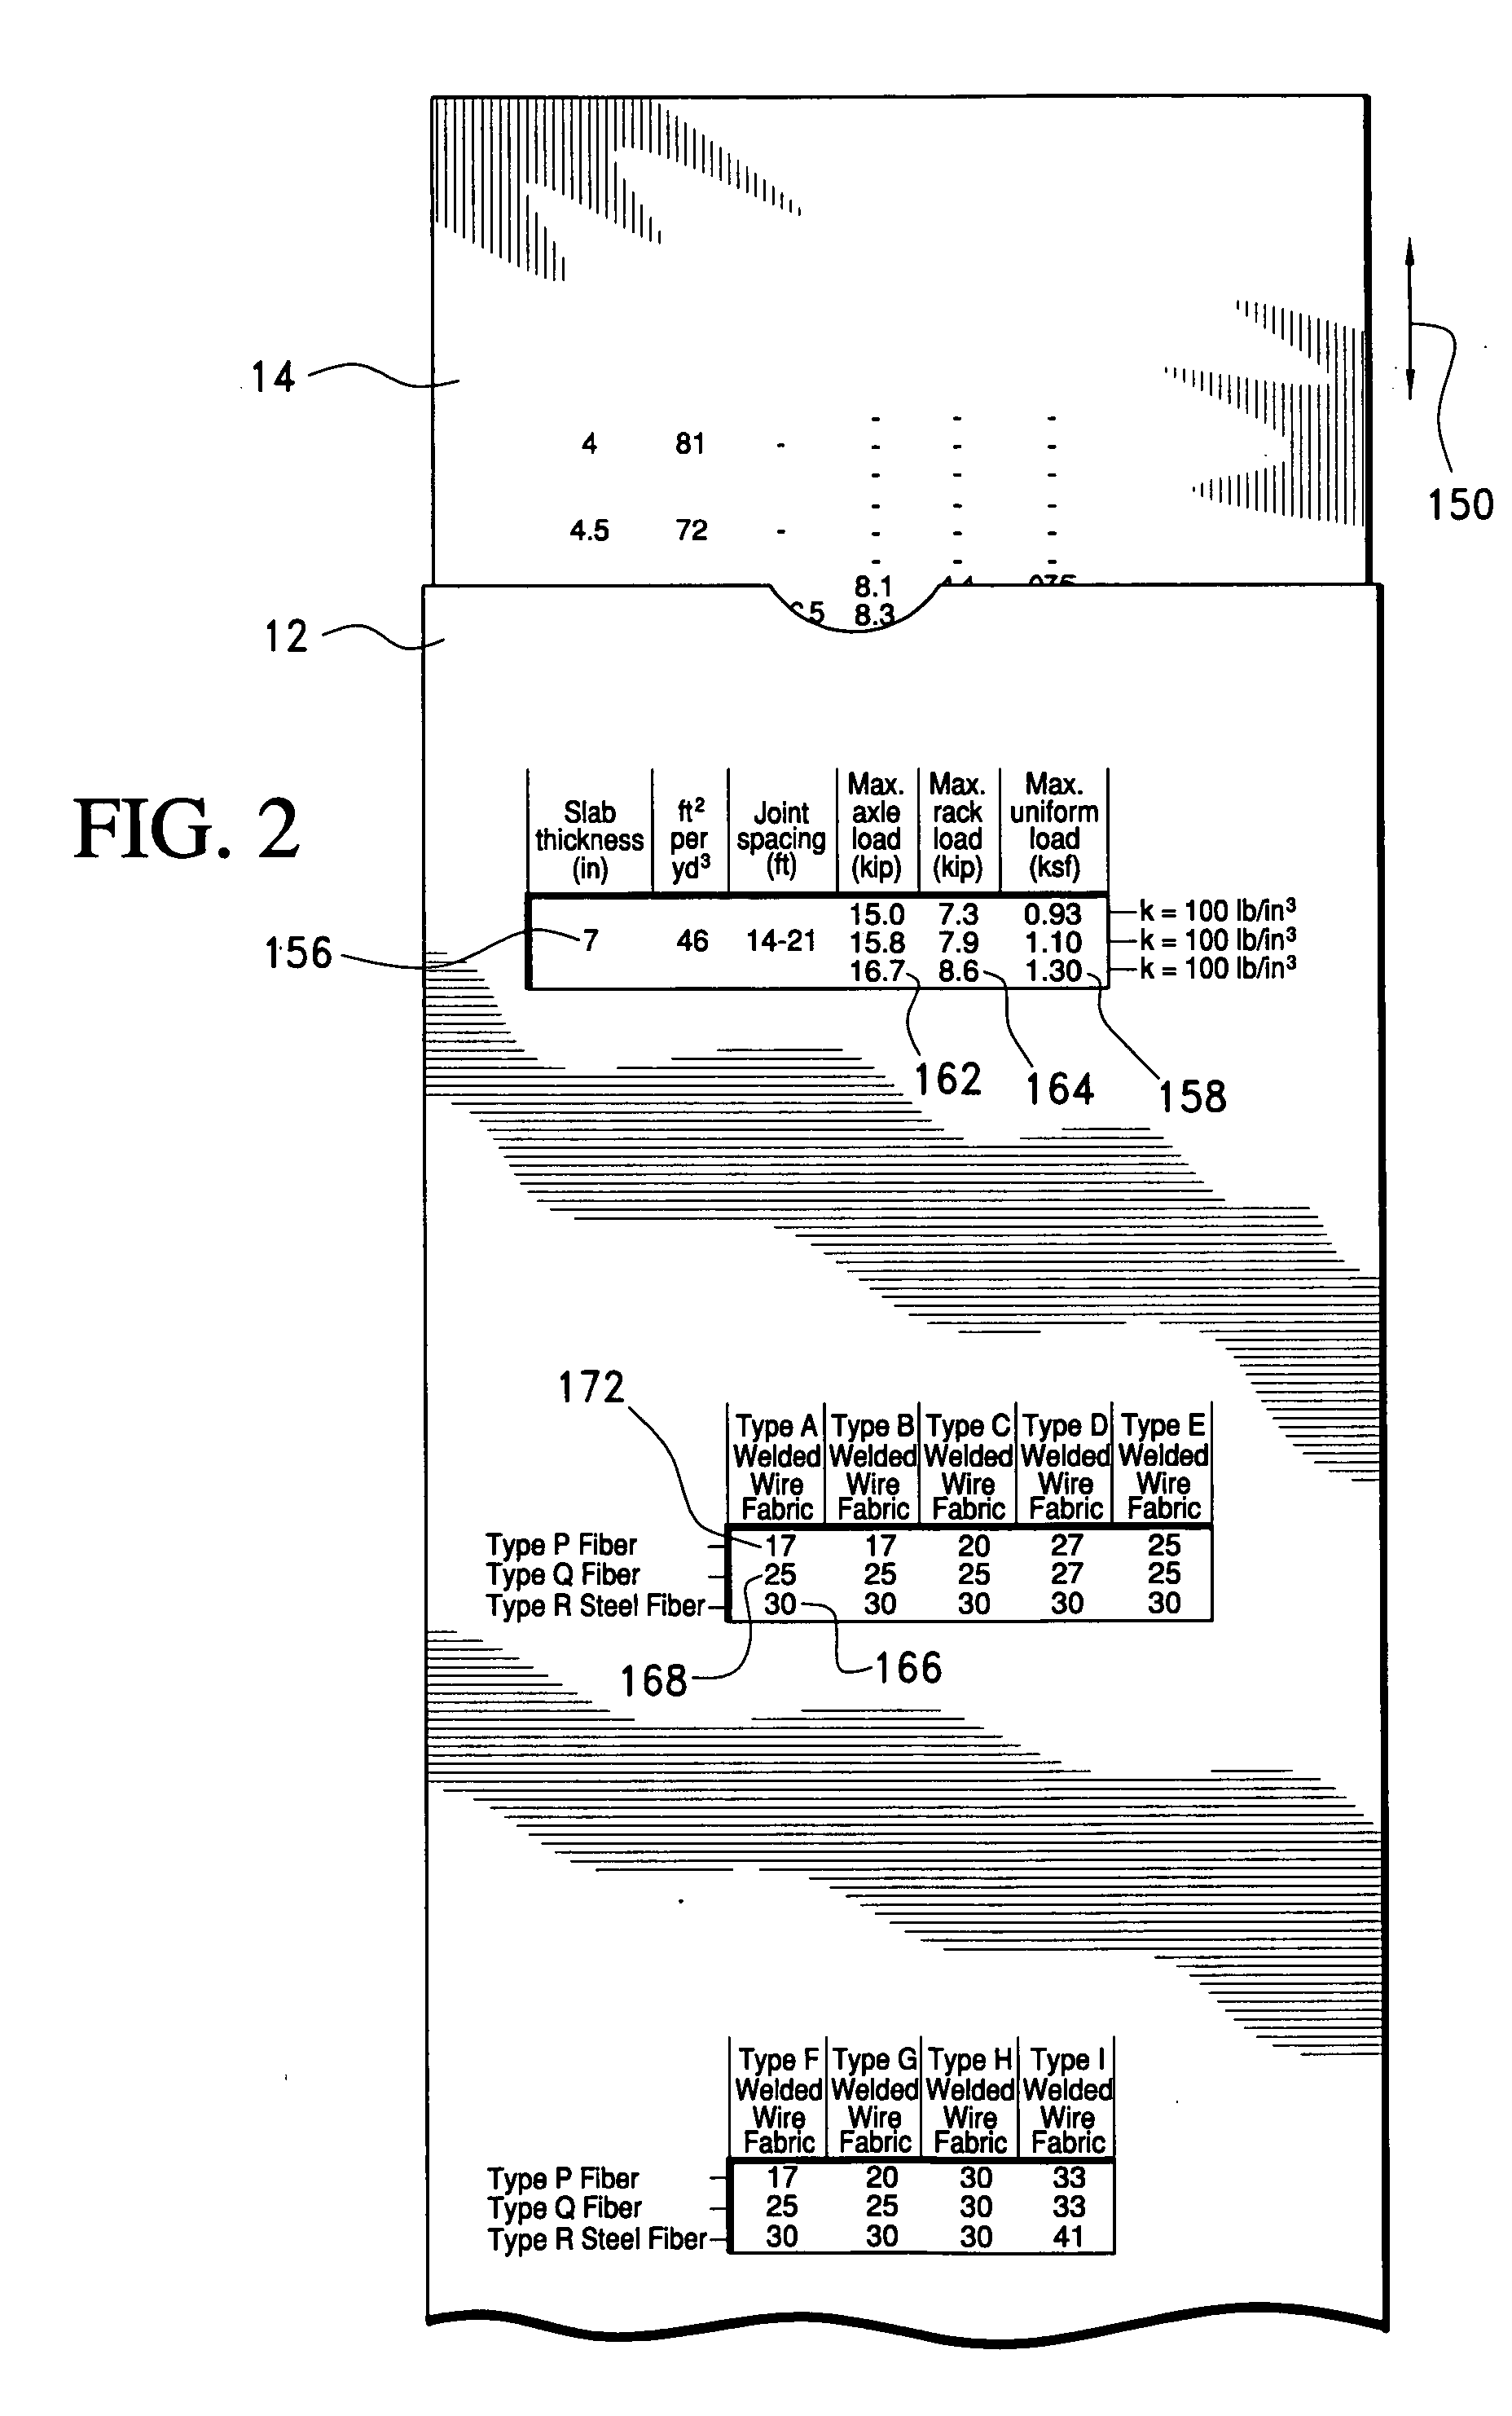 Method and calculator for converting concrete reinforcing materials to an equivalent quantity of concrete reinforcing fibers